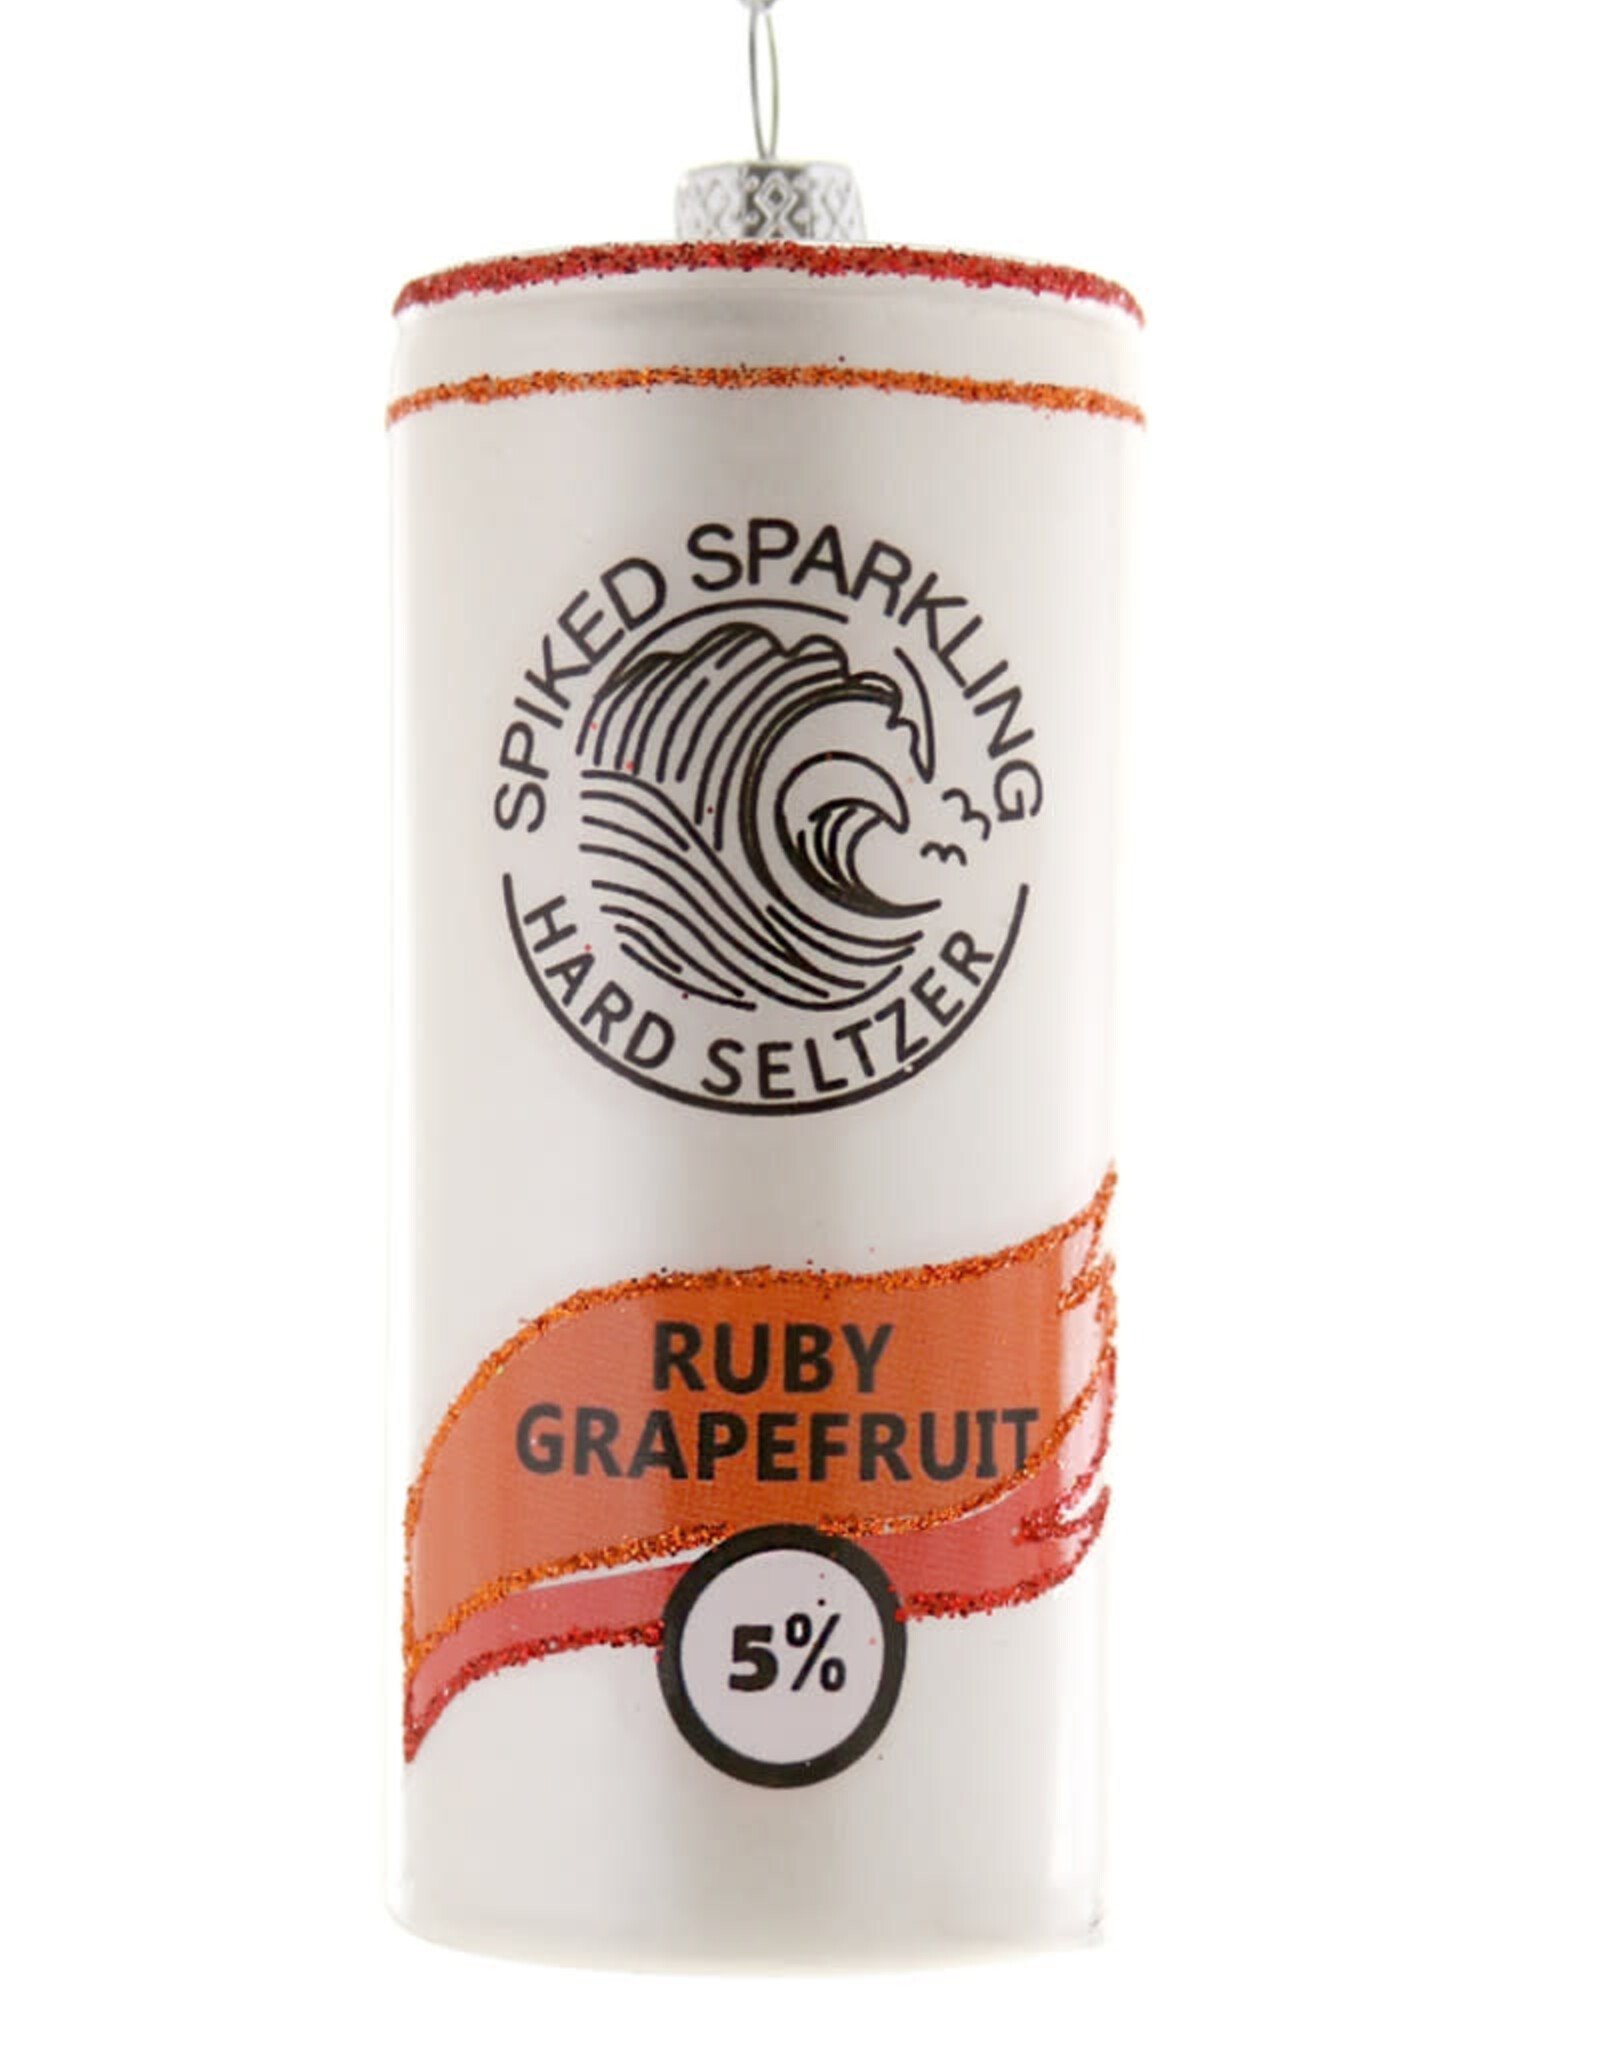 CF-Co SPIKED SPARKLING SELTZER RUBY GRAPEFRUIT